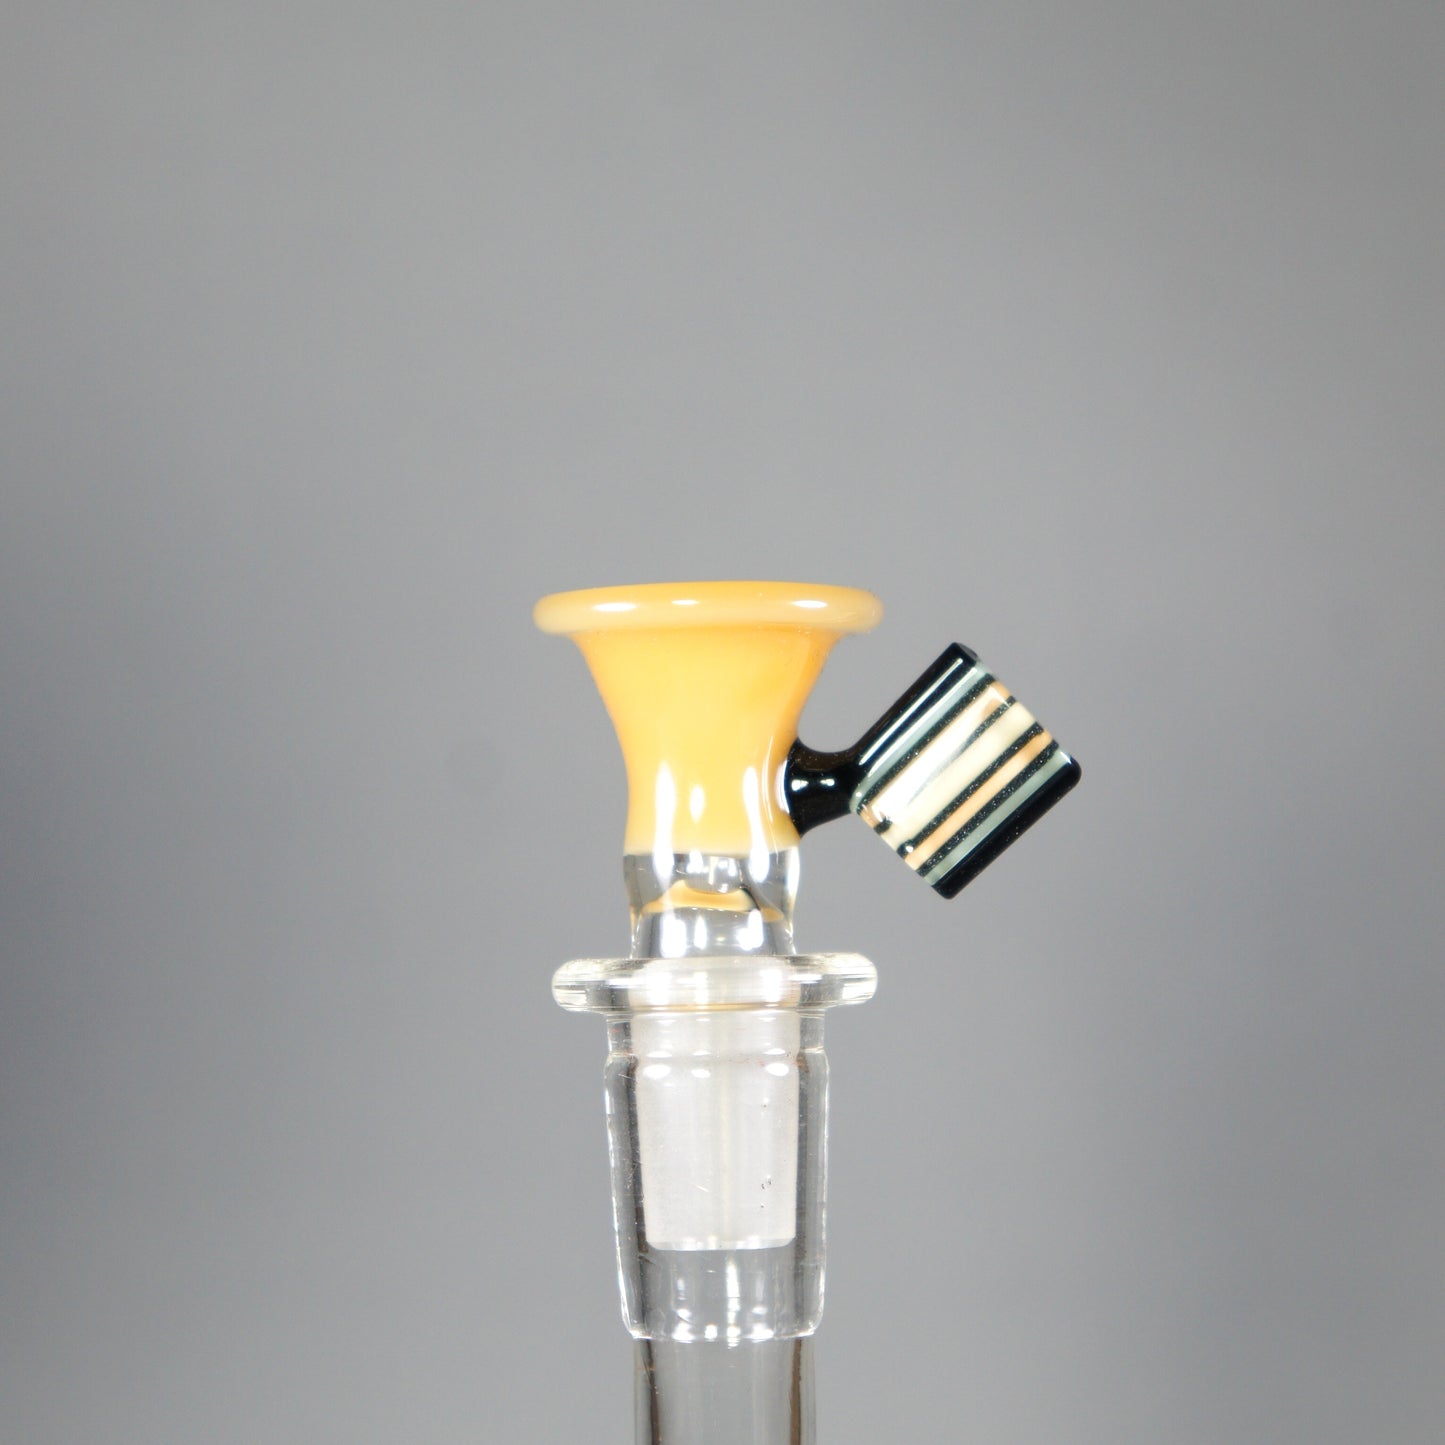 Verre d'intention - Diapositive Chipstack 14 mm - 2